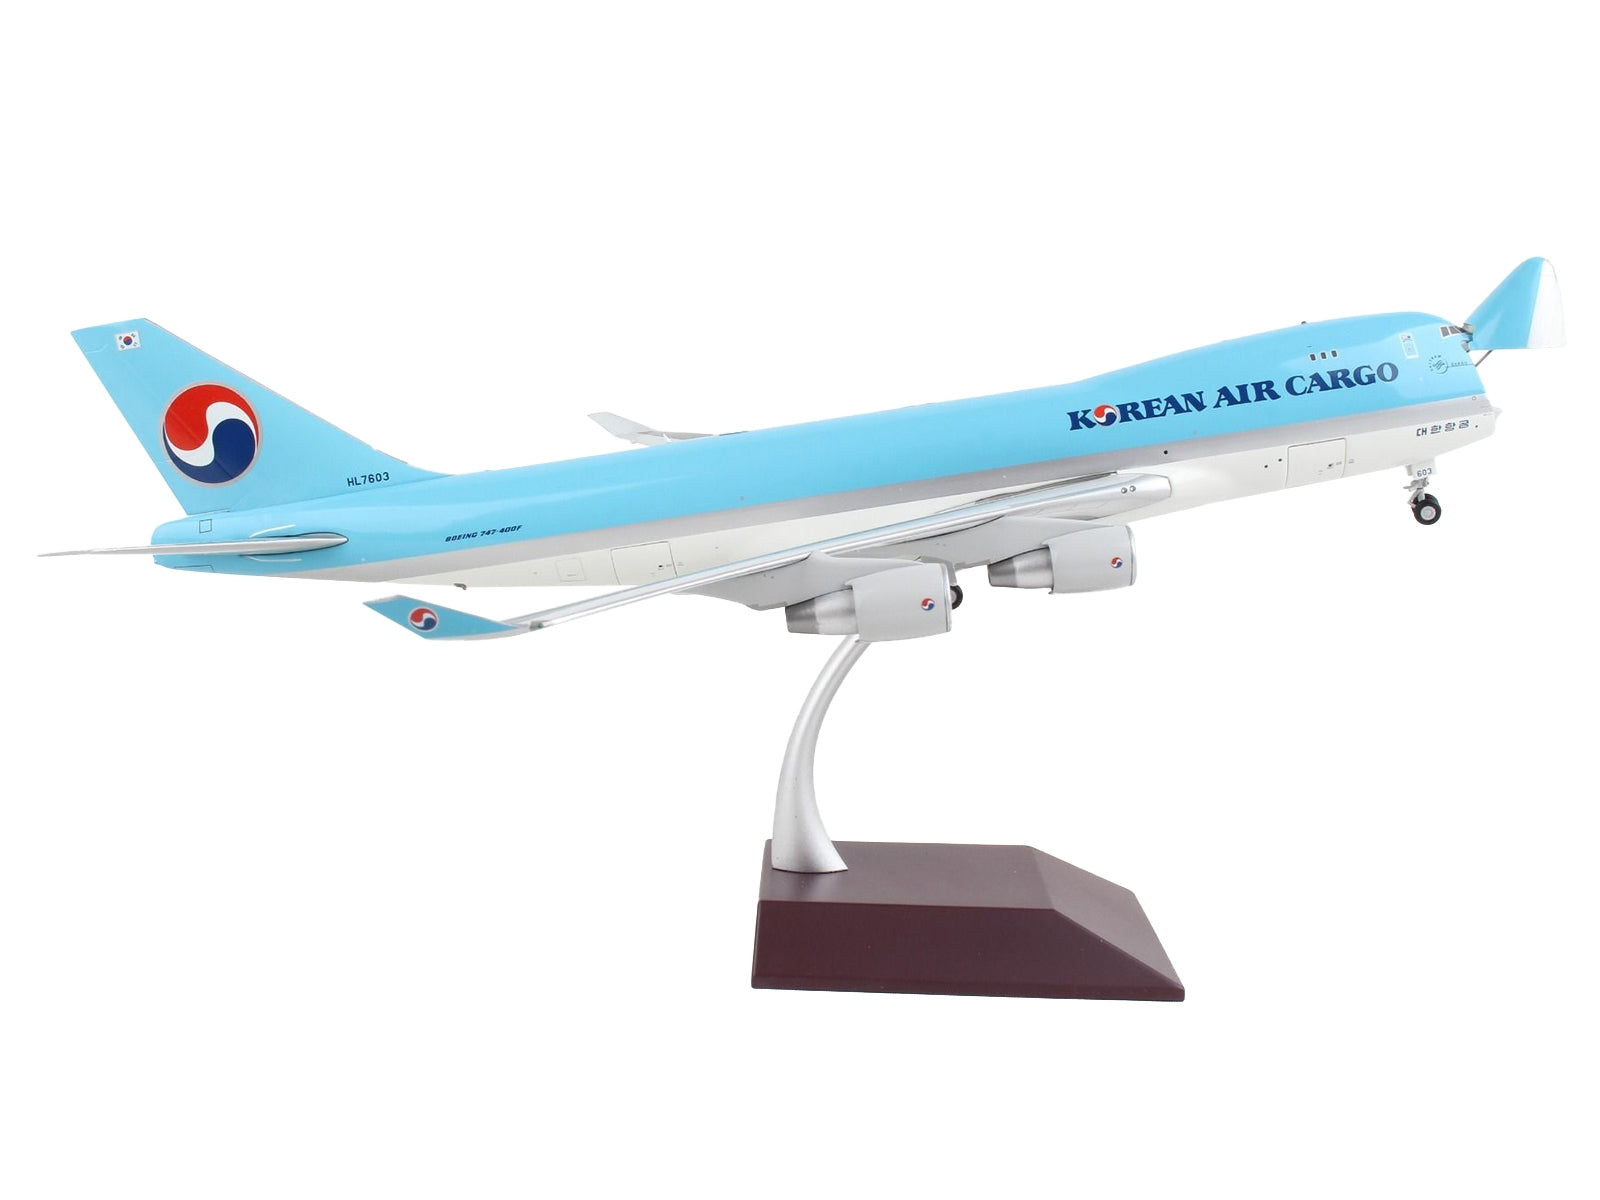 Boeing 747-400F Commercial Aircraft "Korean Air Cargo" Light Blue "Gemini 200 - Interactive" Series 1/200 Diecast Model Airplane by GeminiJets